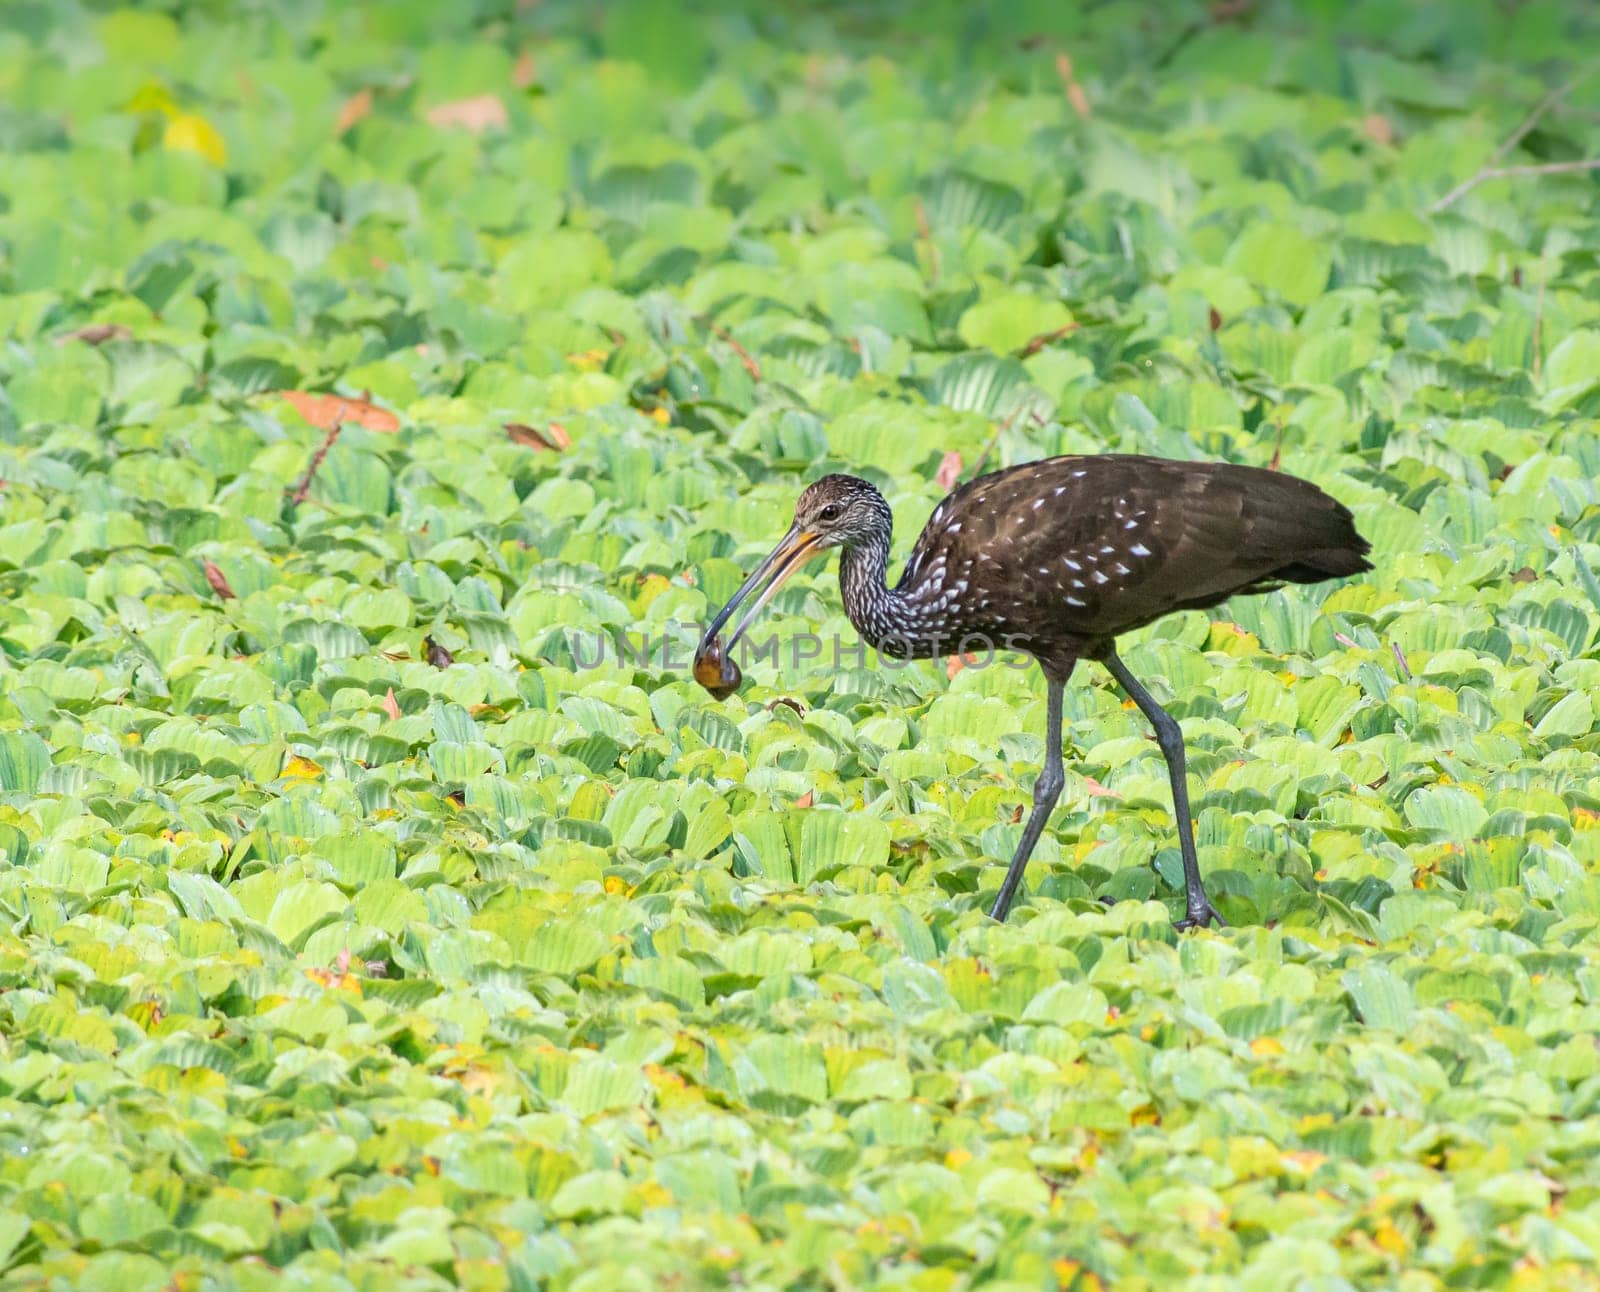 A Limpkin with a snail snack in a marsh by Rajh_Photography